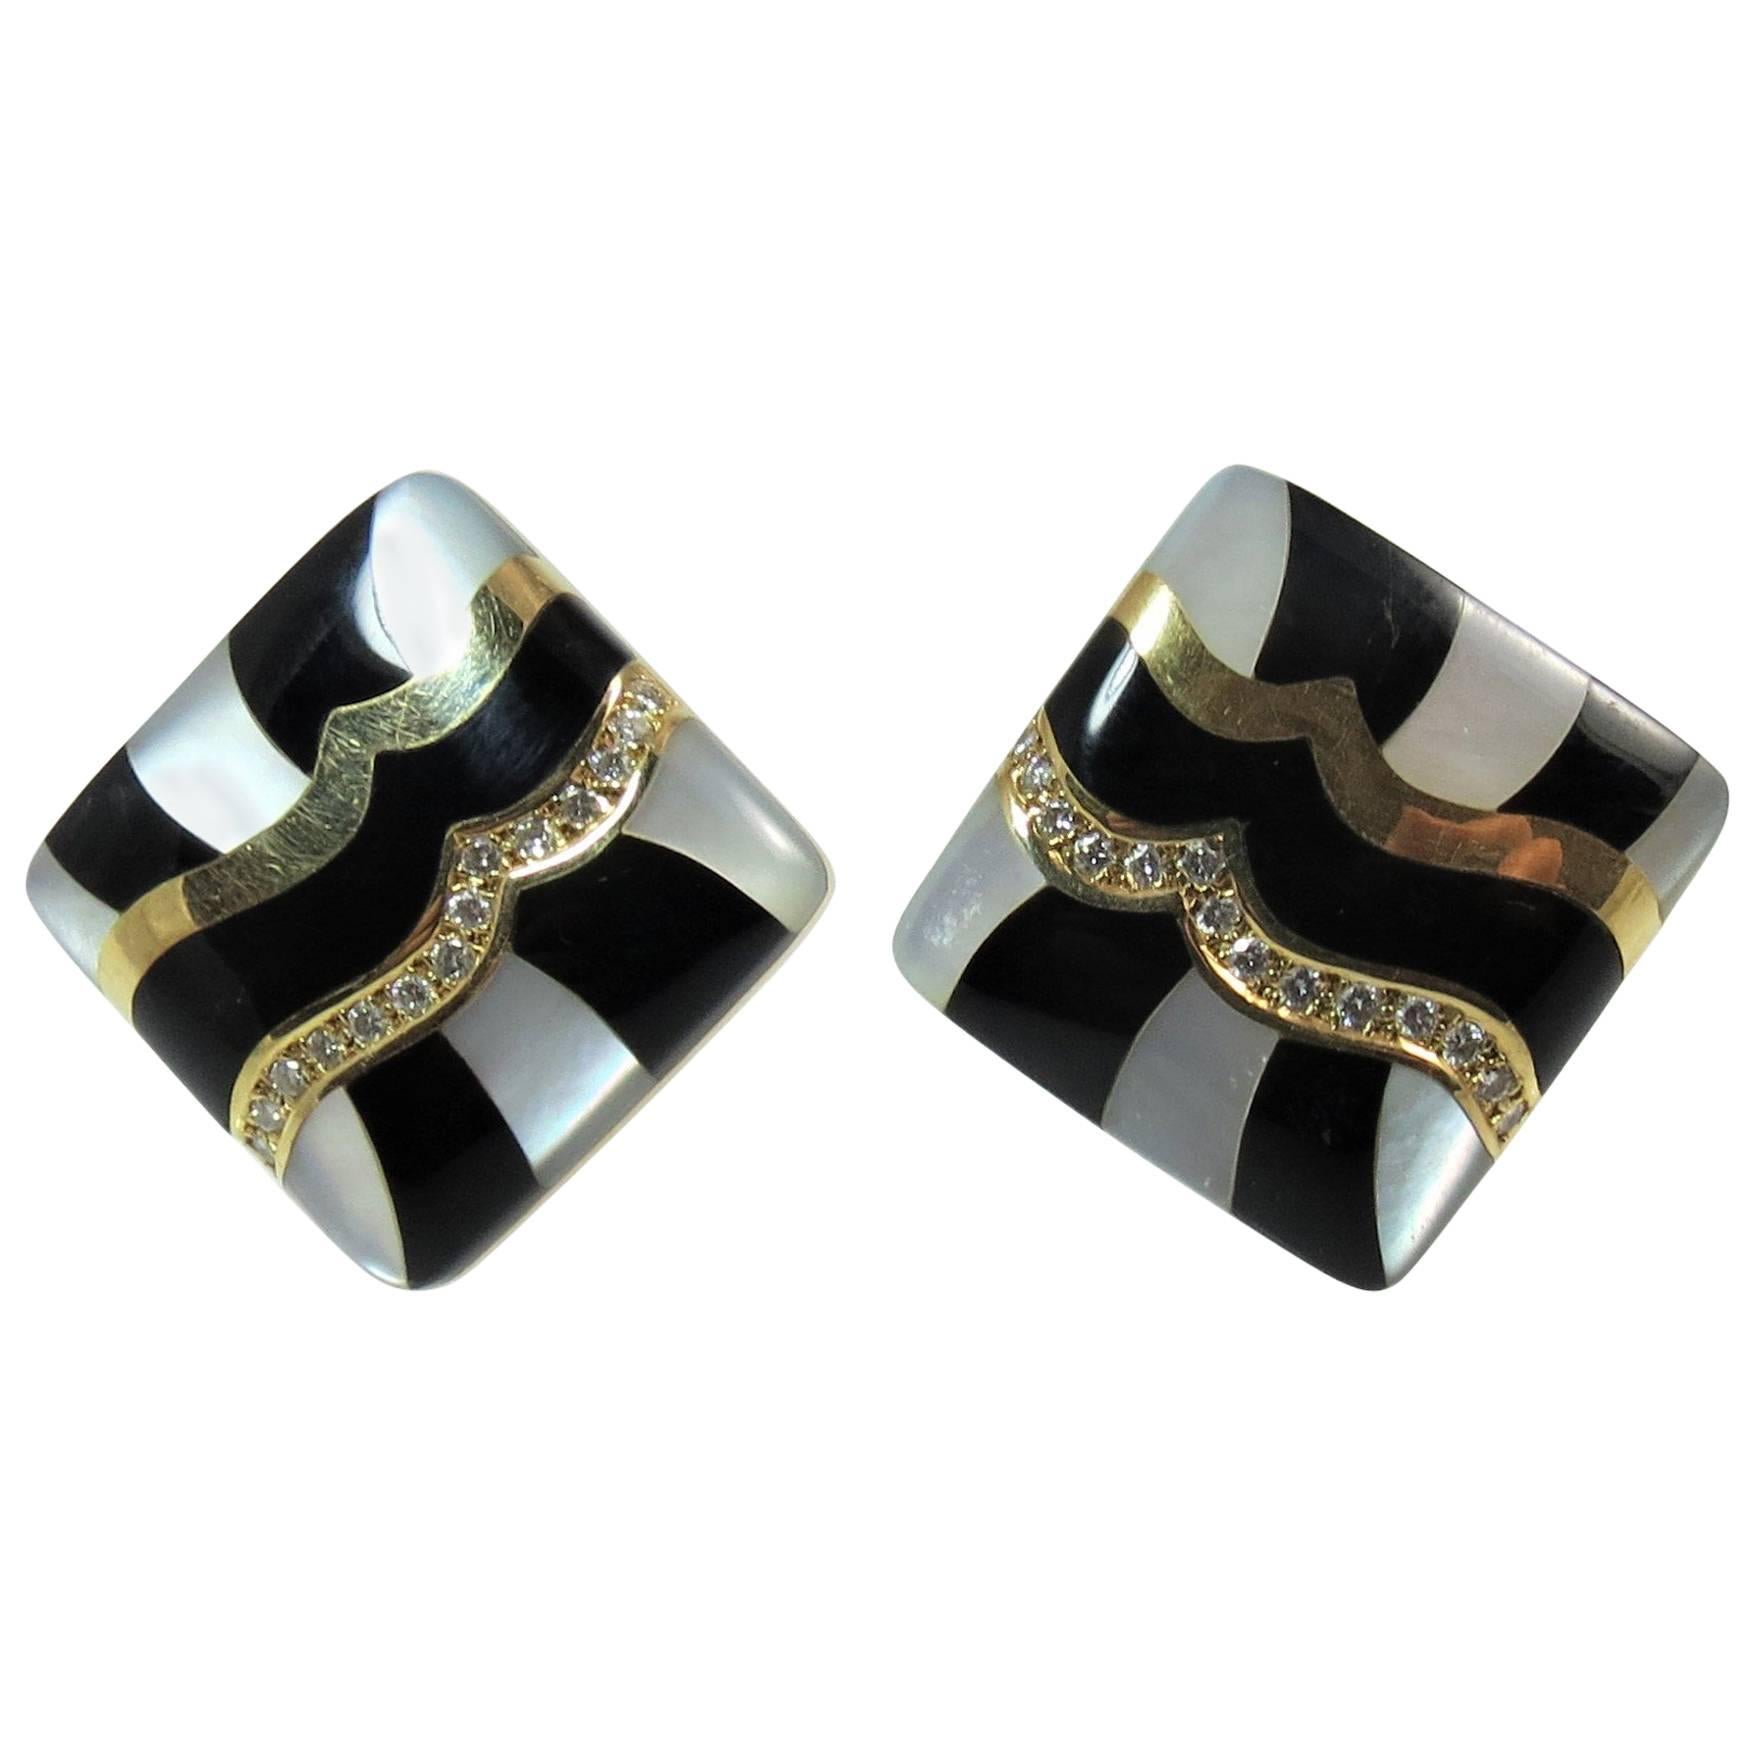 Asch Grossbardt 14 Karat Gold, Diamond, Black Onyx and Mother-of-Pearl Ear Clips For Sale